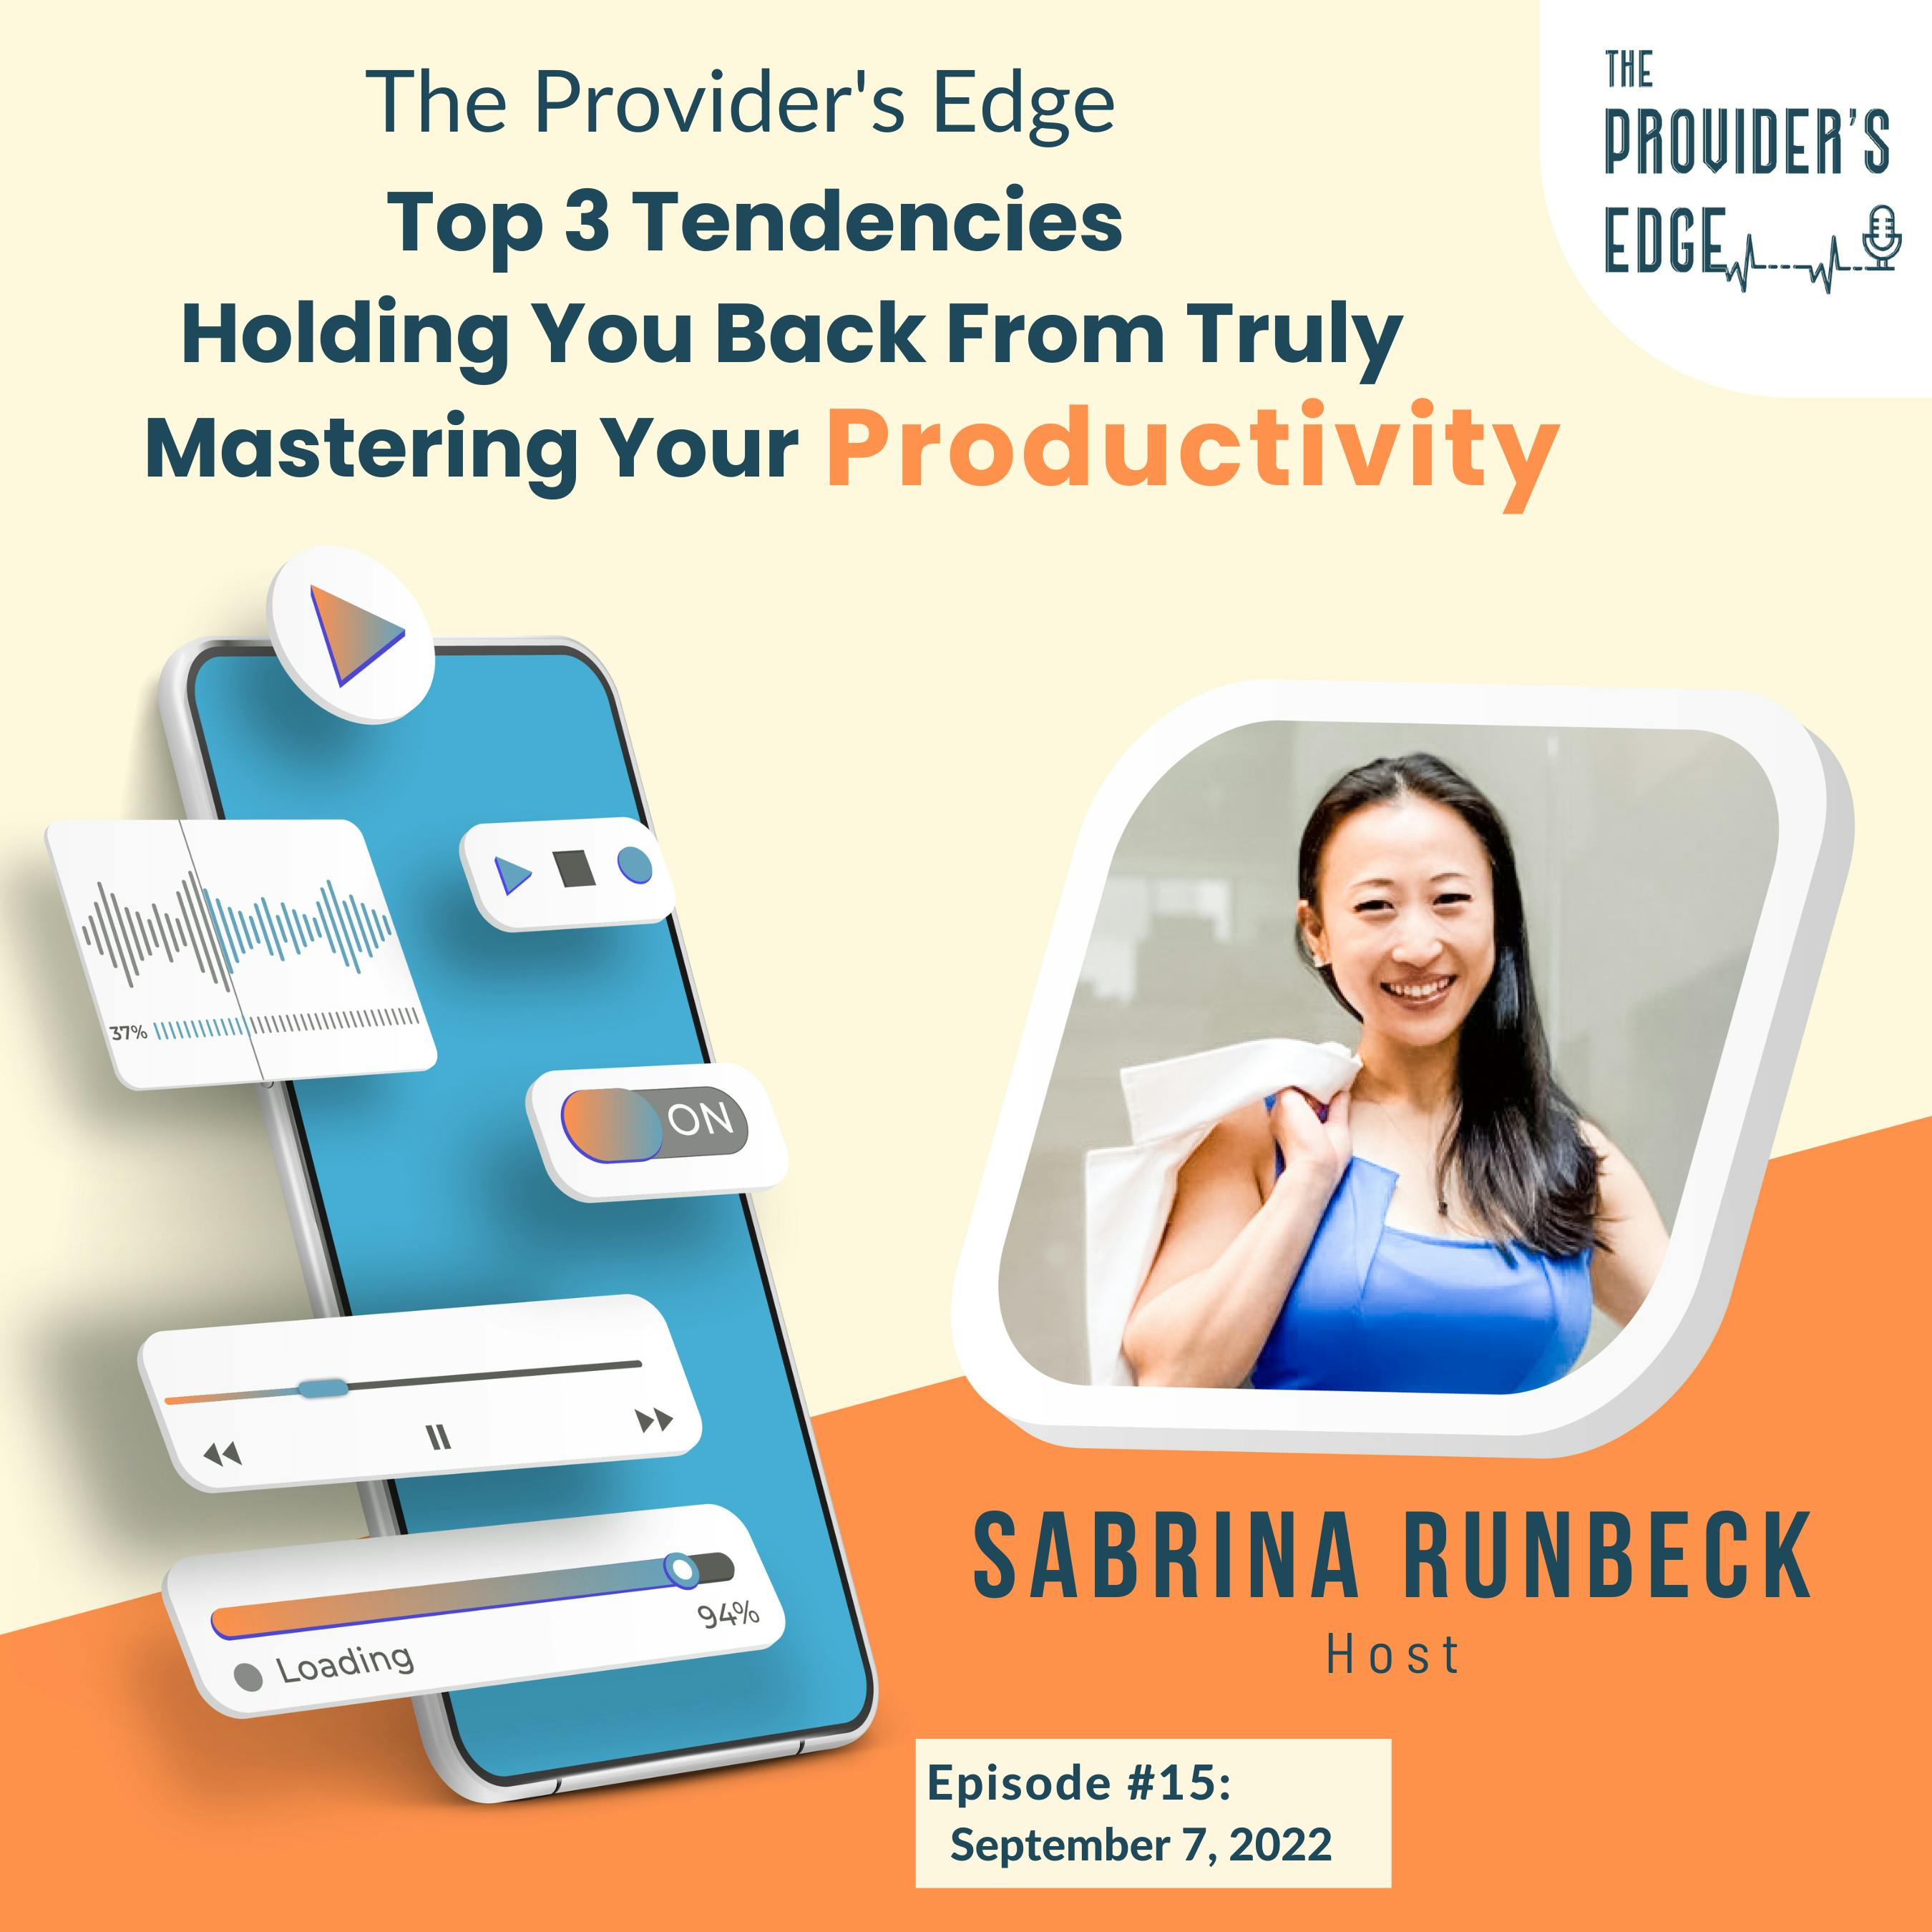 Top 3 Tendencies Holding You Back From Truly Mastering Your Productivity with Sabrina Runbeck Ep 15